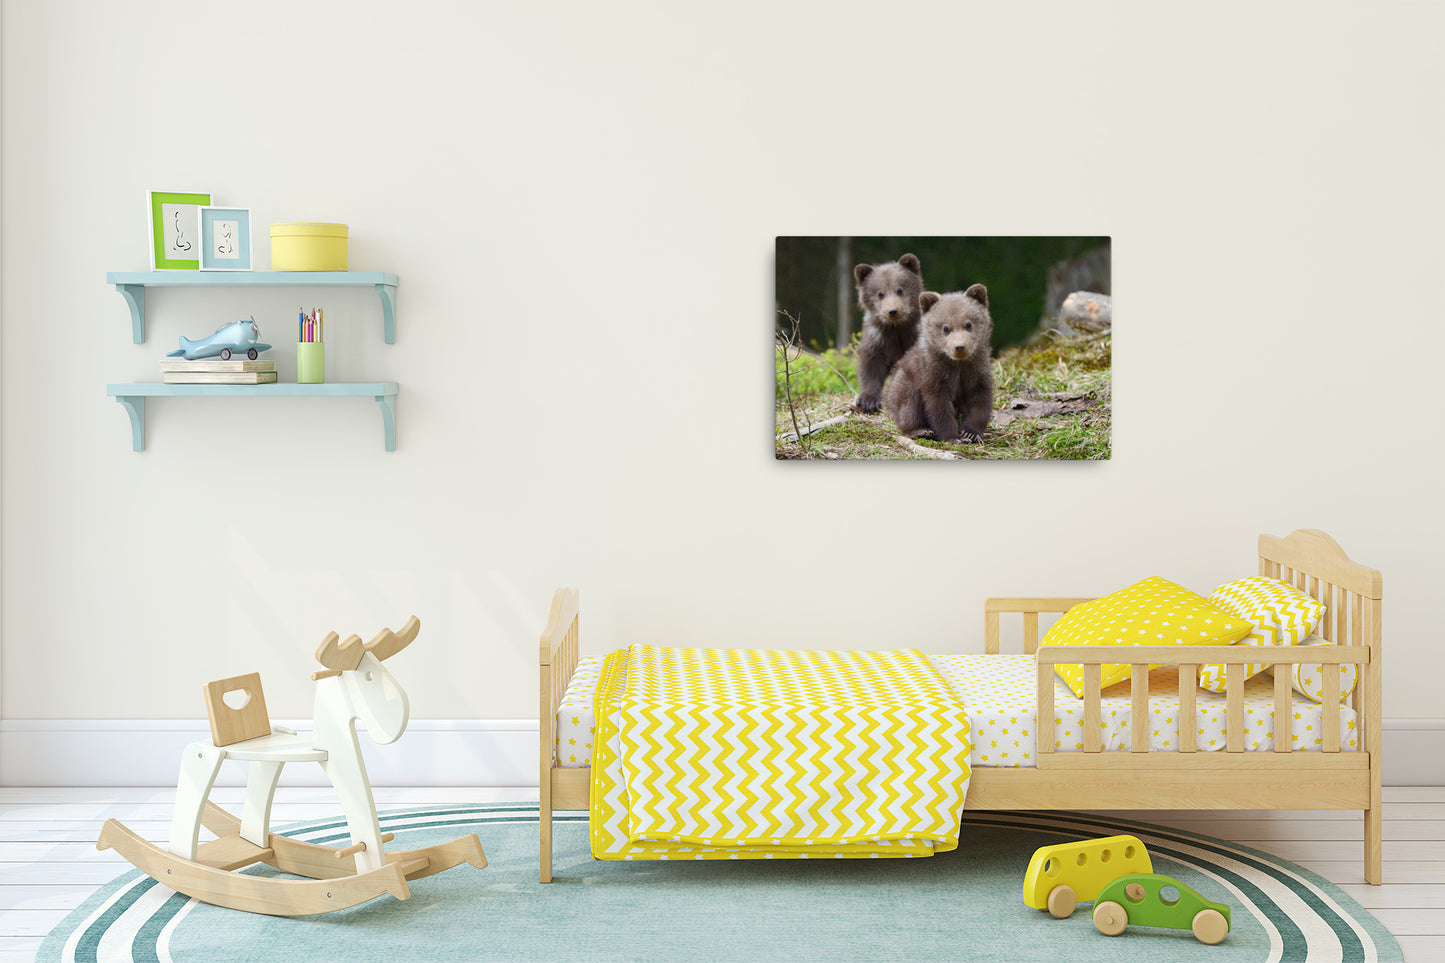 Over The Crib Wall Decor: Adorable Cubs In The Trees - Wildlife / Animal / Nature Photograph Canvas Wall Art Print - Artwork